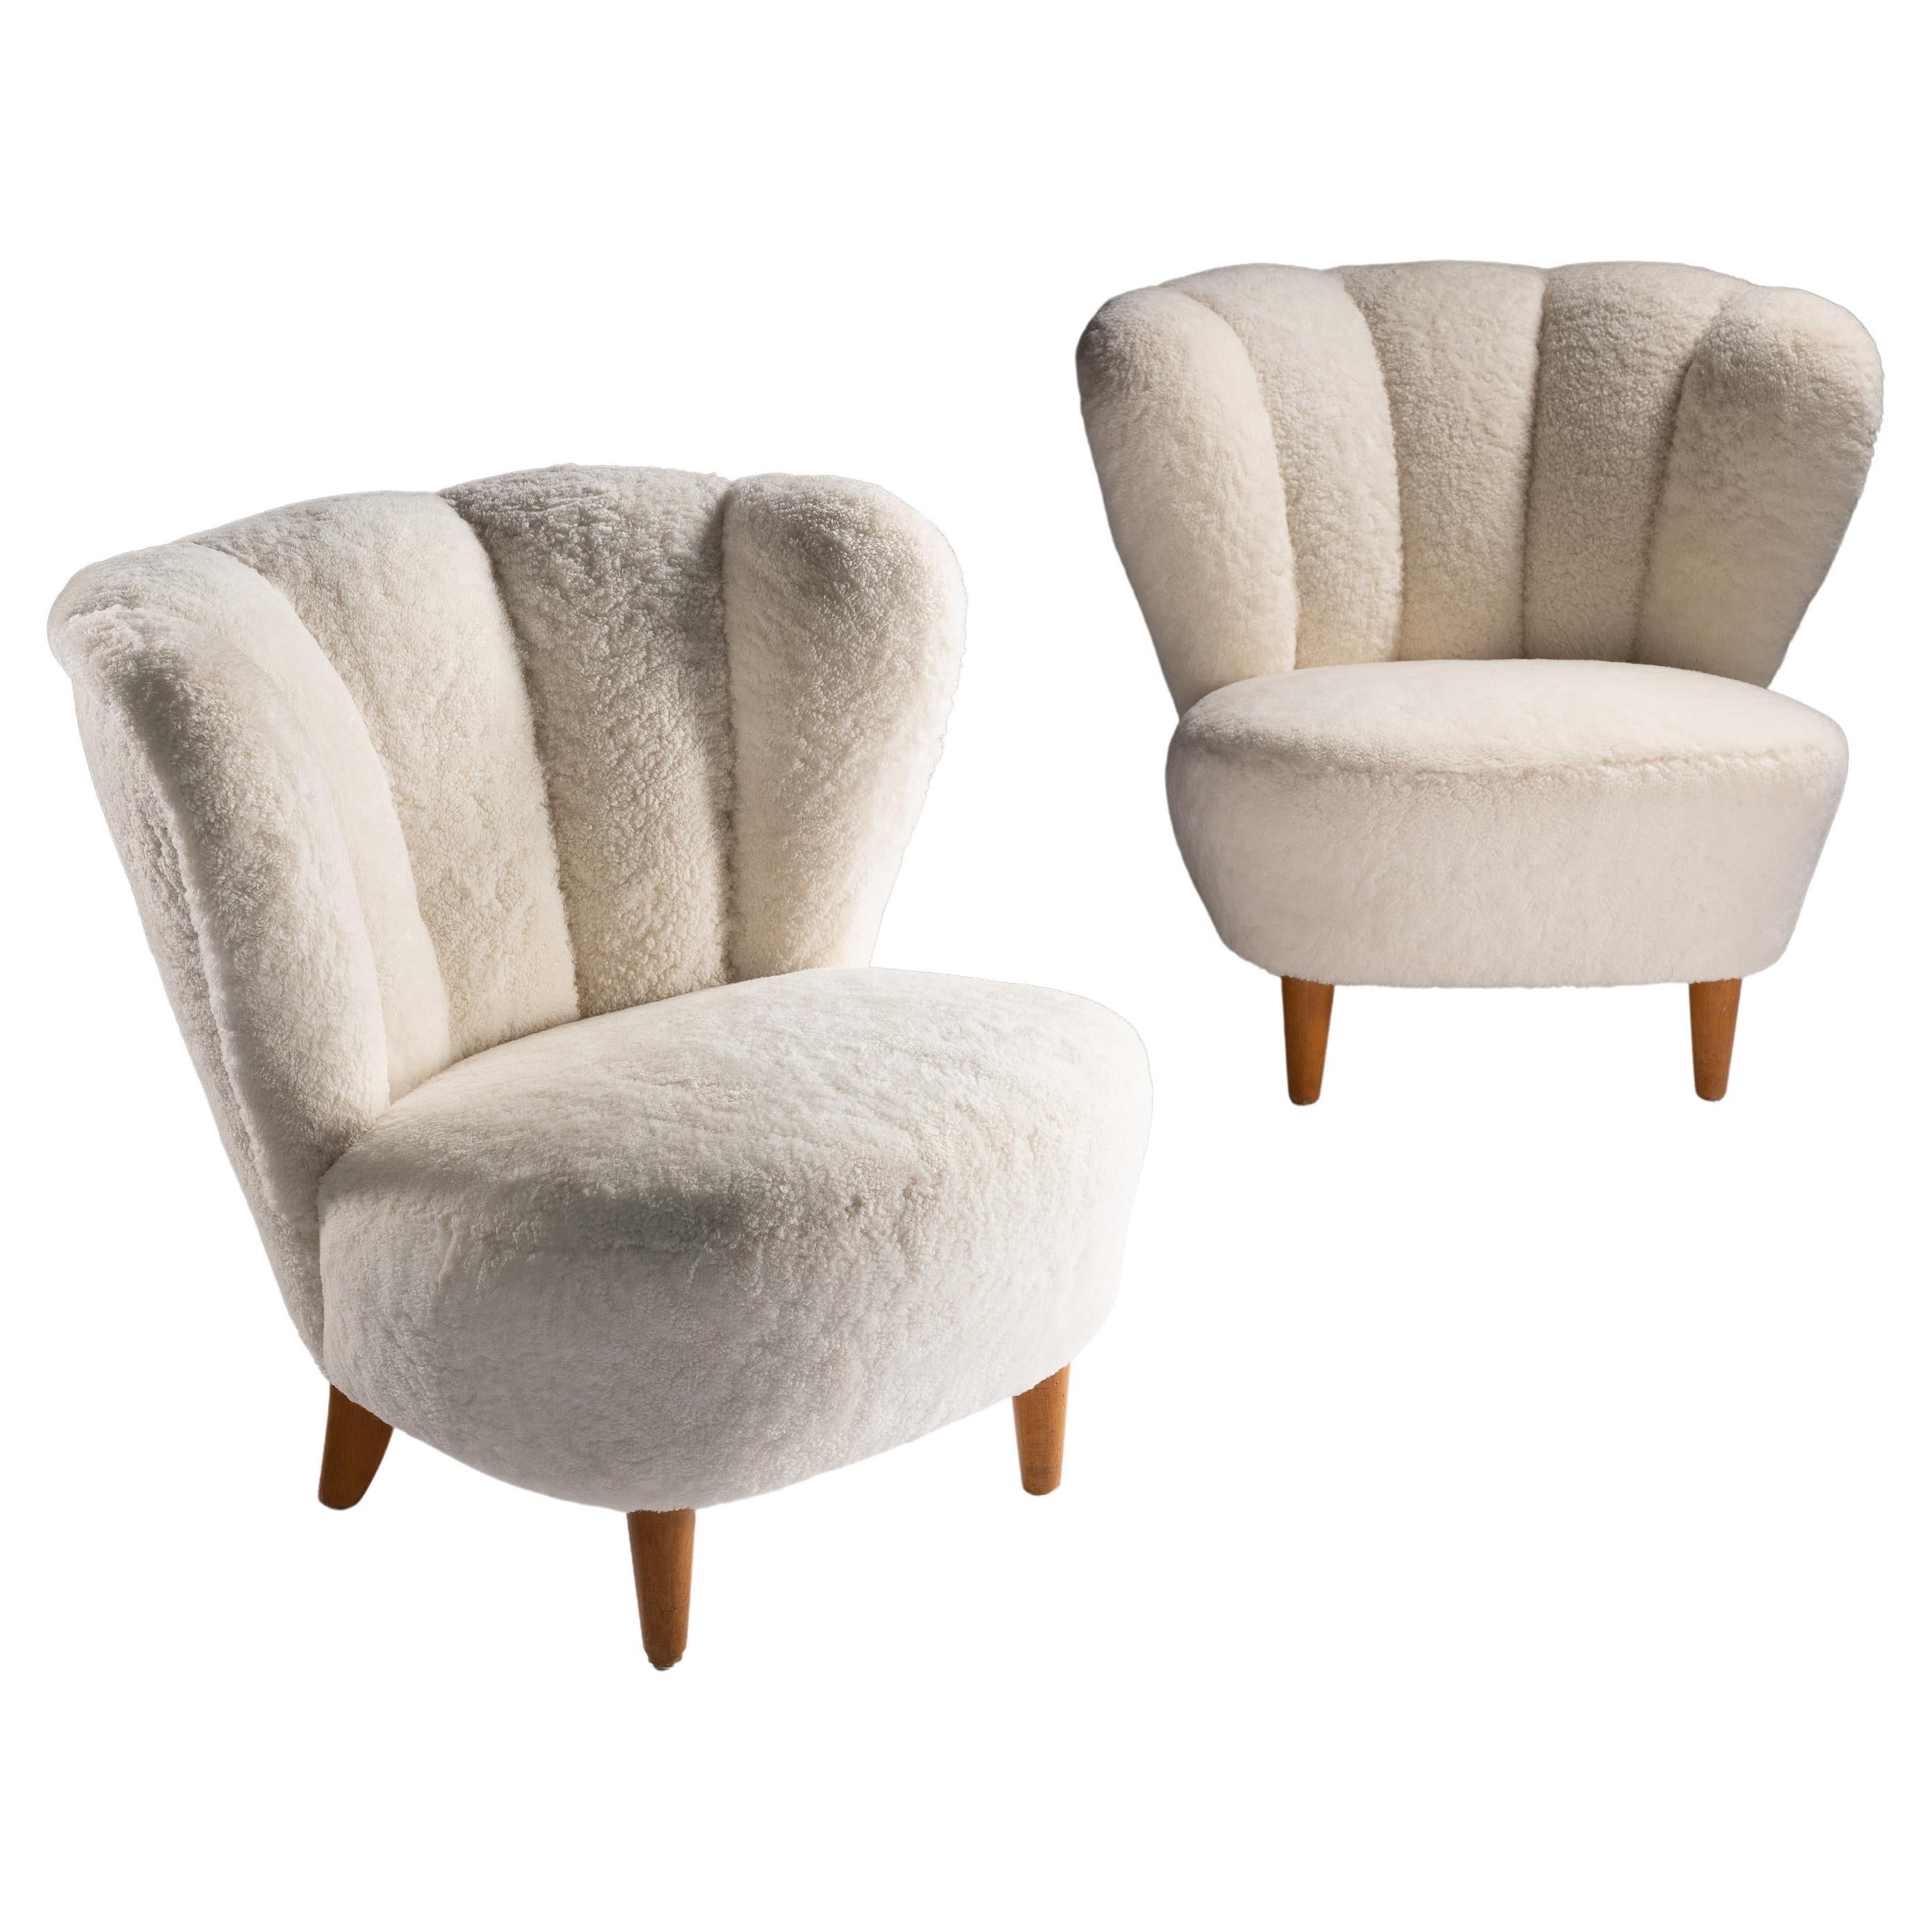 Pair of Scandinavian Vintage White Easy Chairs 1950s, Shearling Upholstery For Sale